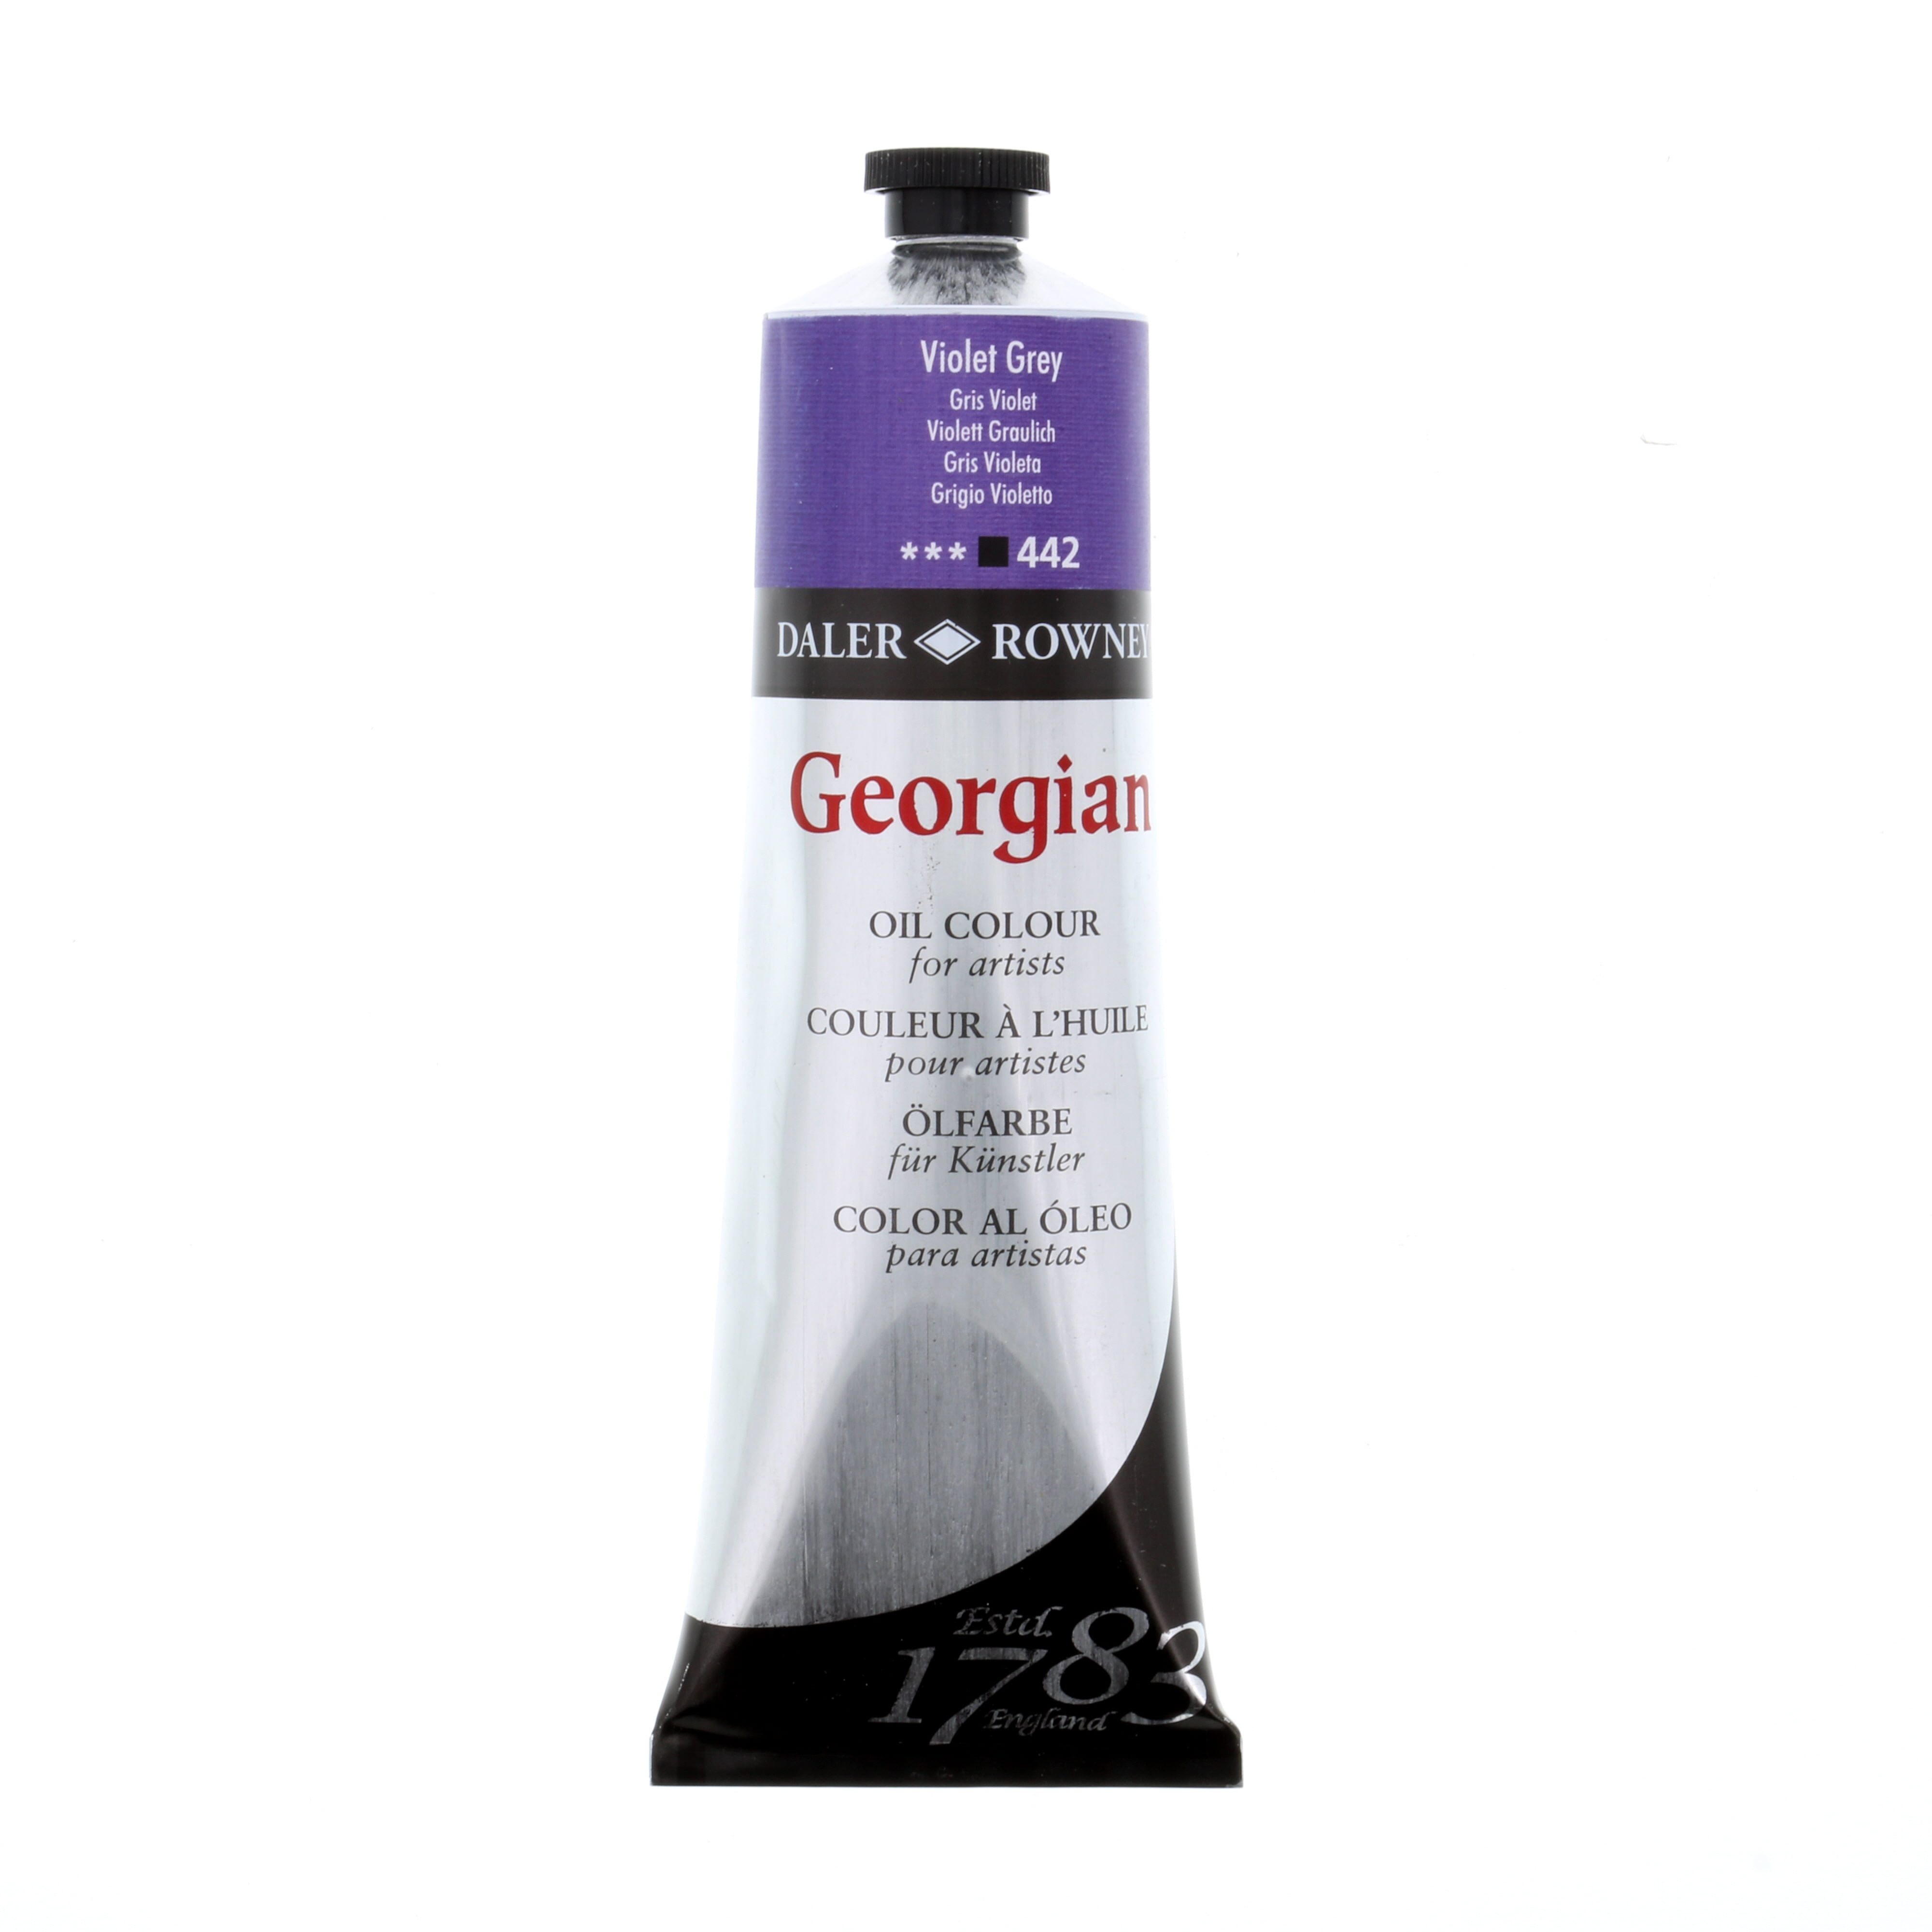 Daler Rowney Georgian Oil Paint Violet Grey 225ml Tube - Art Paints for  Canvas Paper and More - Oil Painting Supplies for Artists and Students 